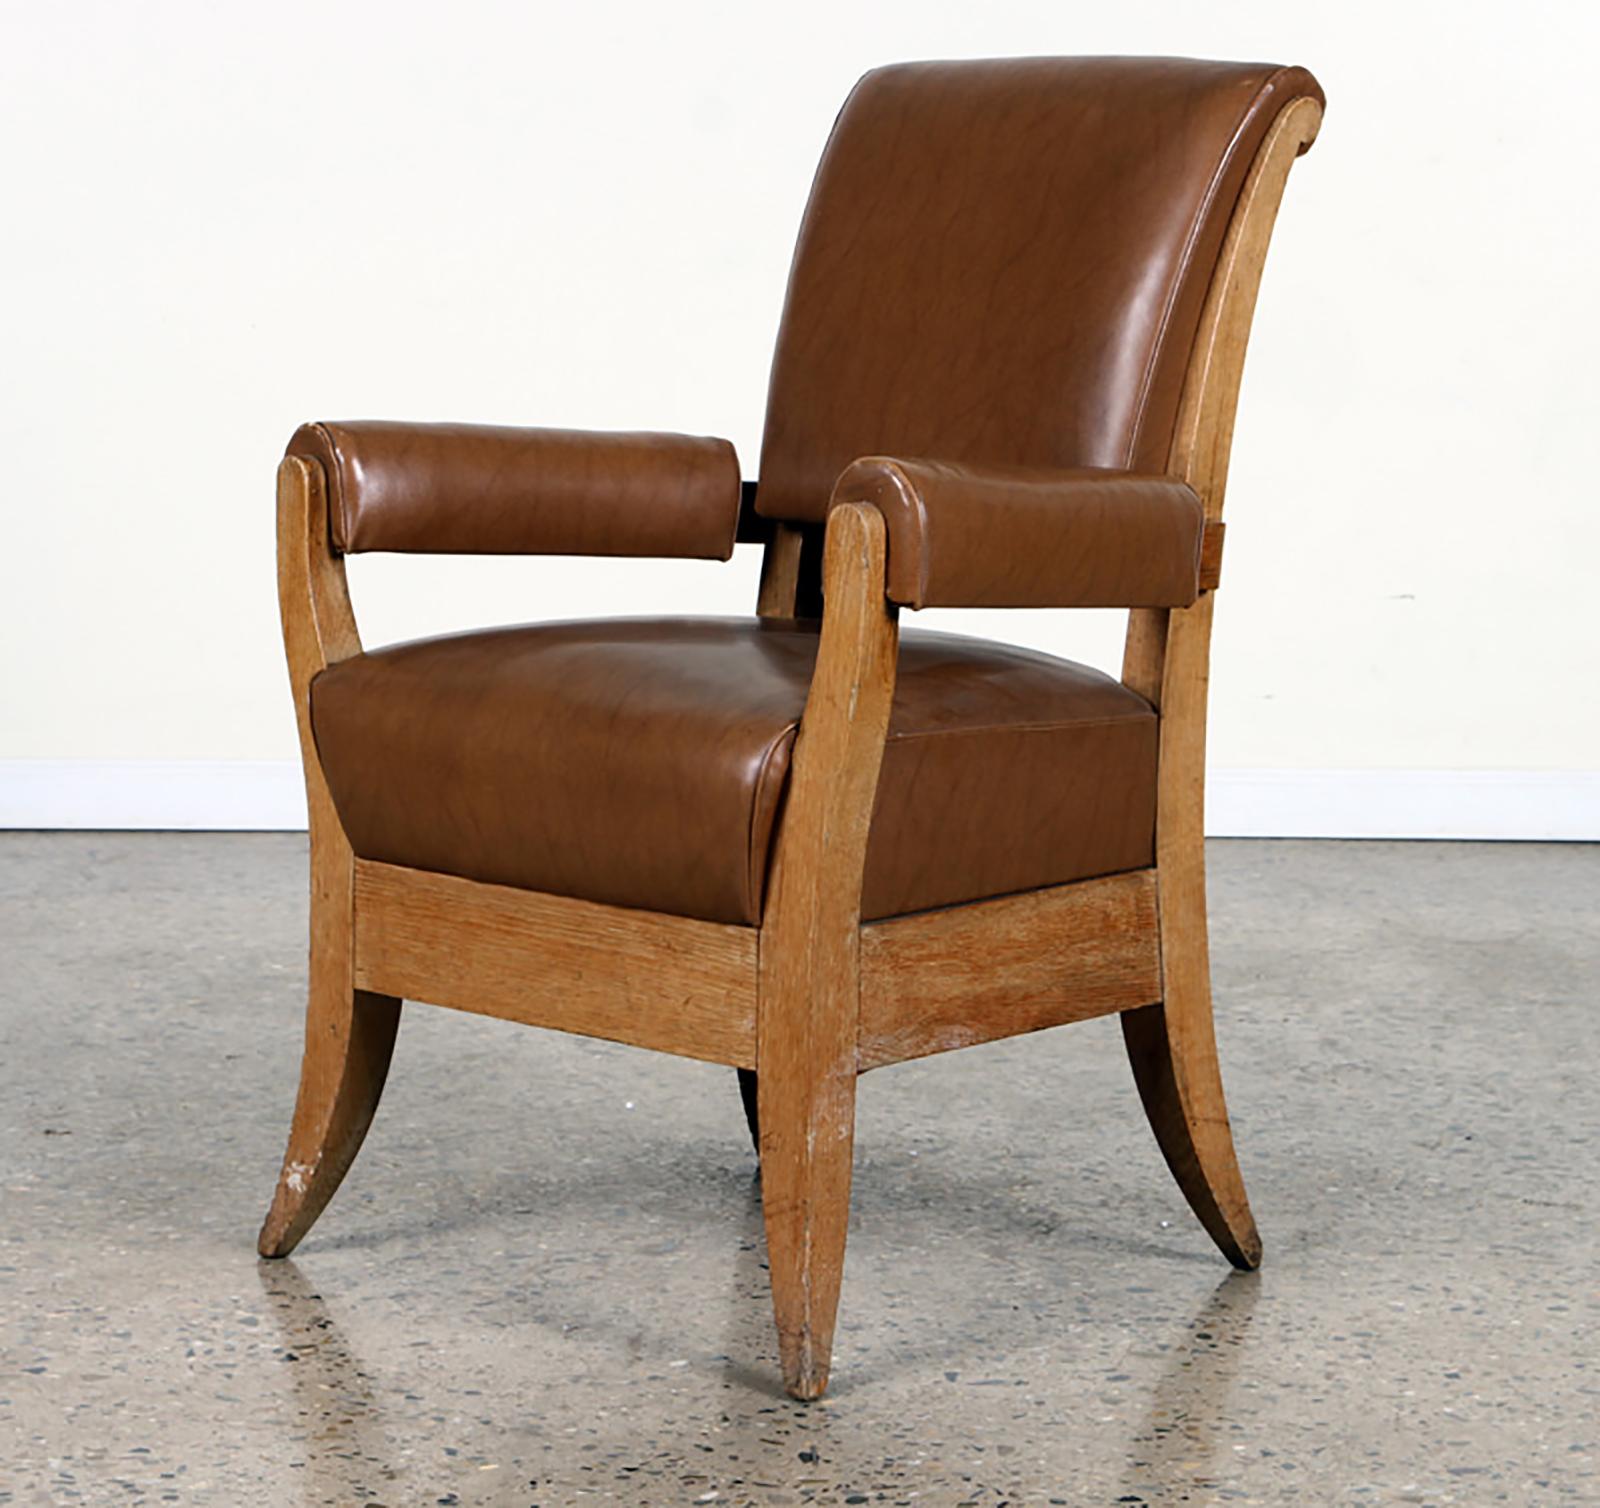 Pair of French 1940s leather upholstered oak armchairs.